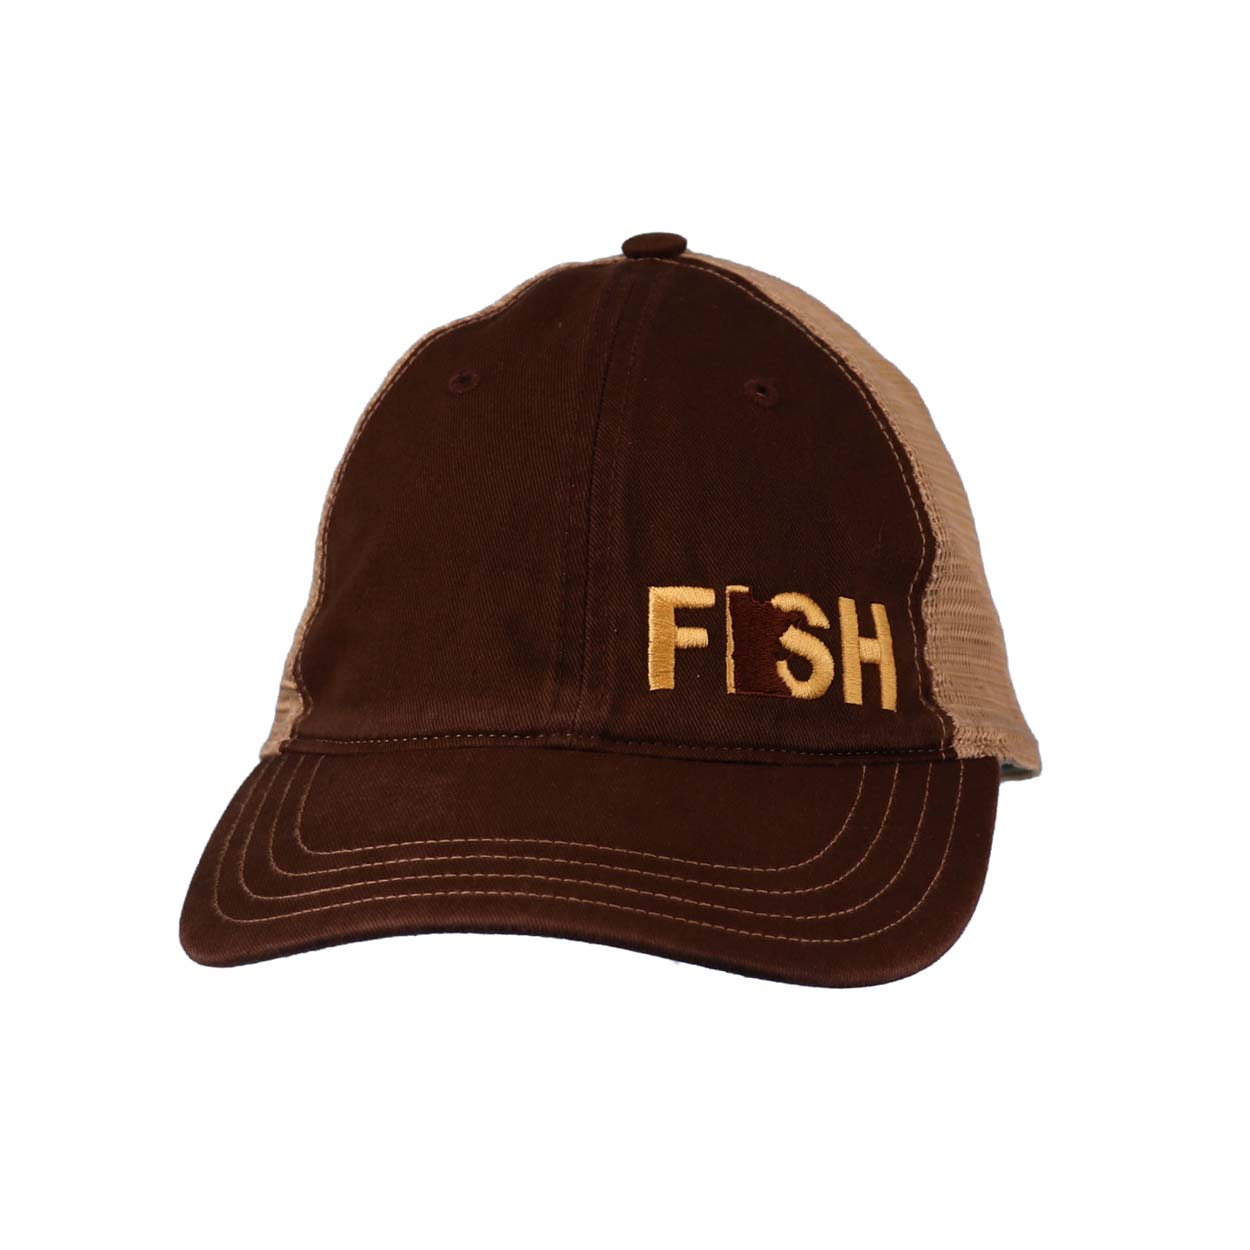 Fish Minnesota Night Out Embroidered Unstructured Snapback Dad Hat Brown/Khaki